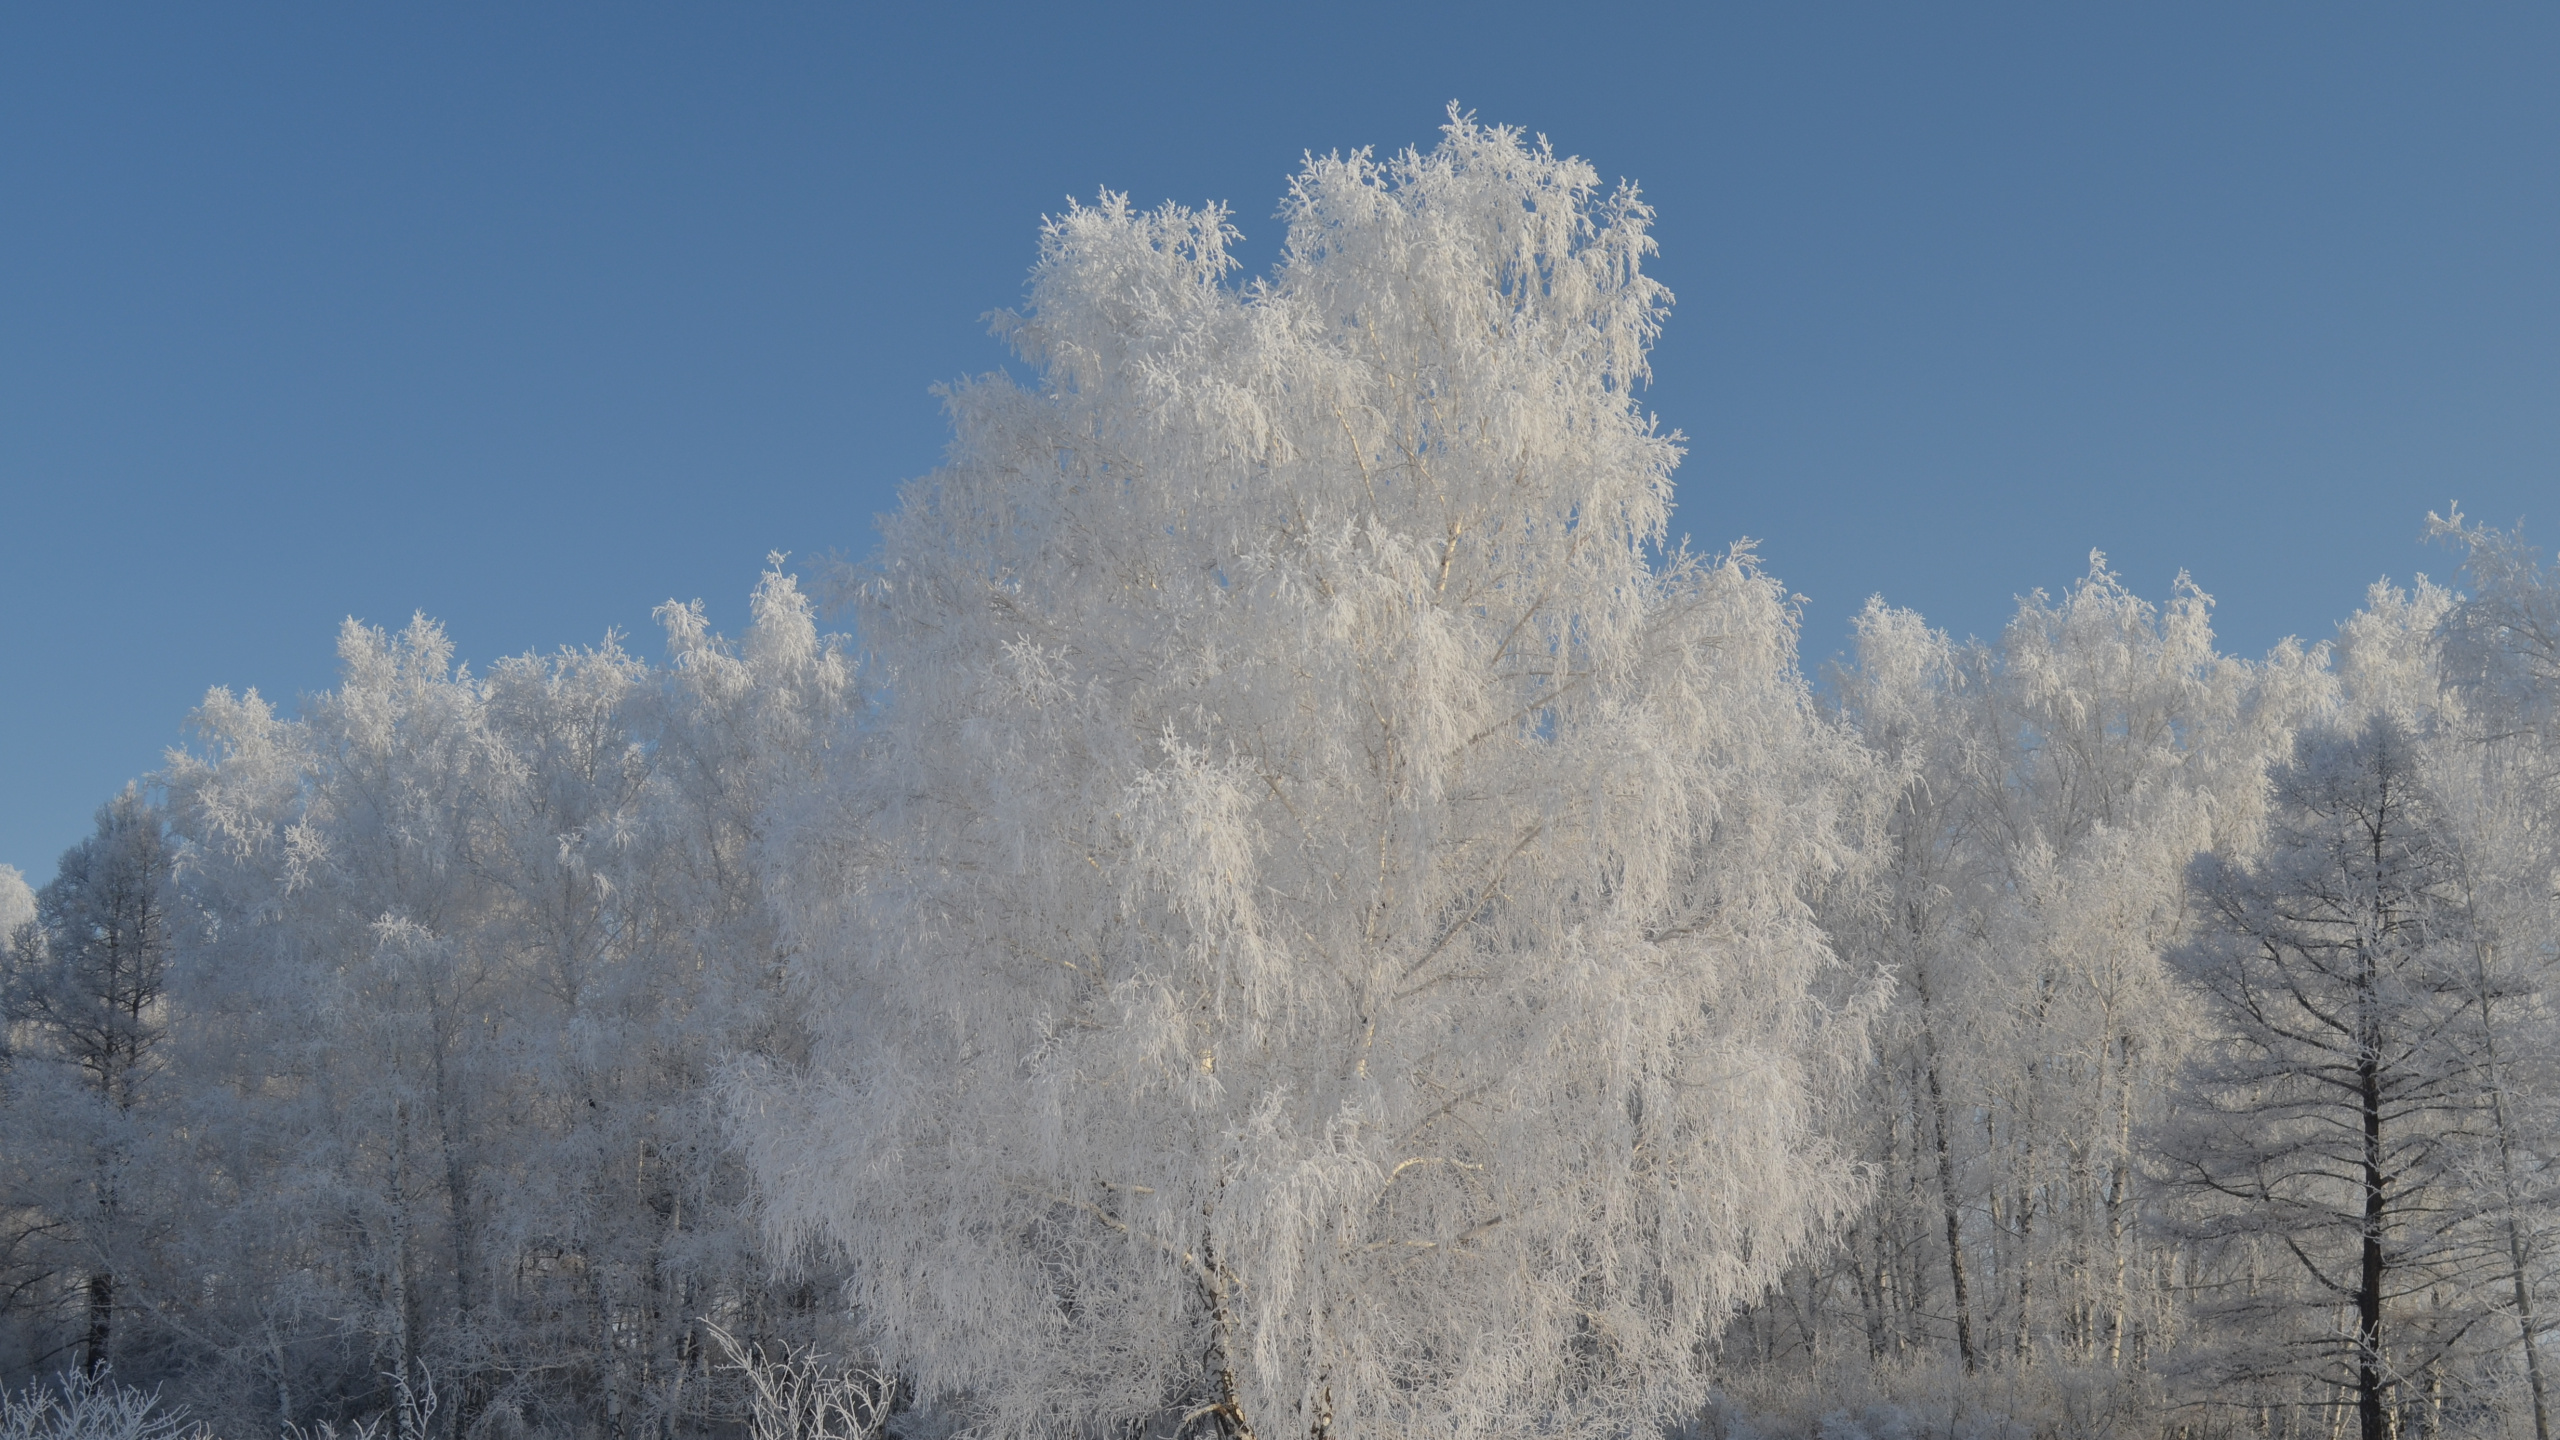 White Trees Covered by Snow During Daytime. Wallpaper in 2560x1440 Resolution